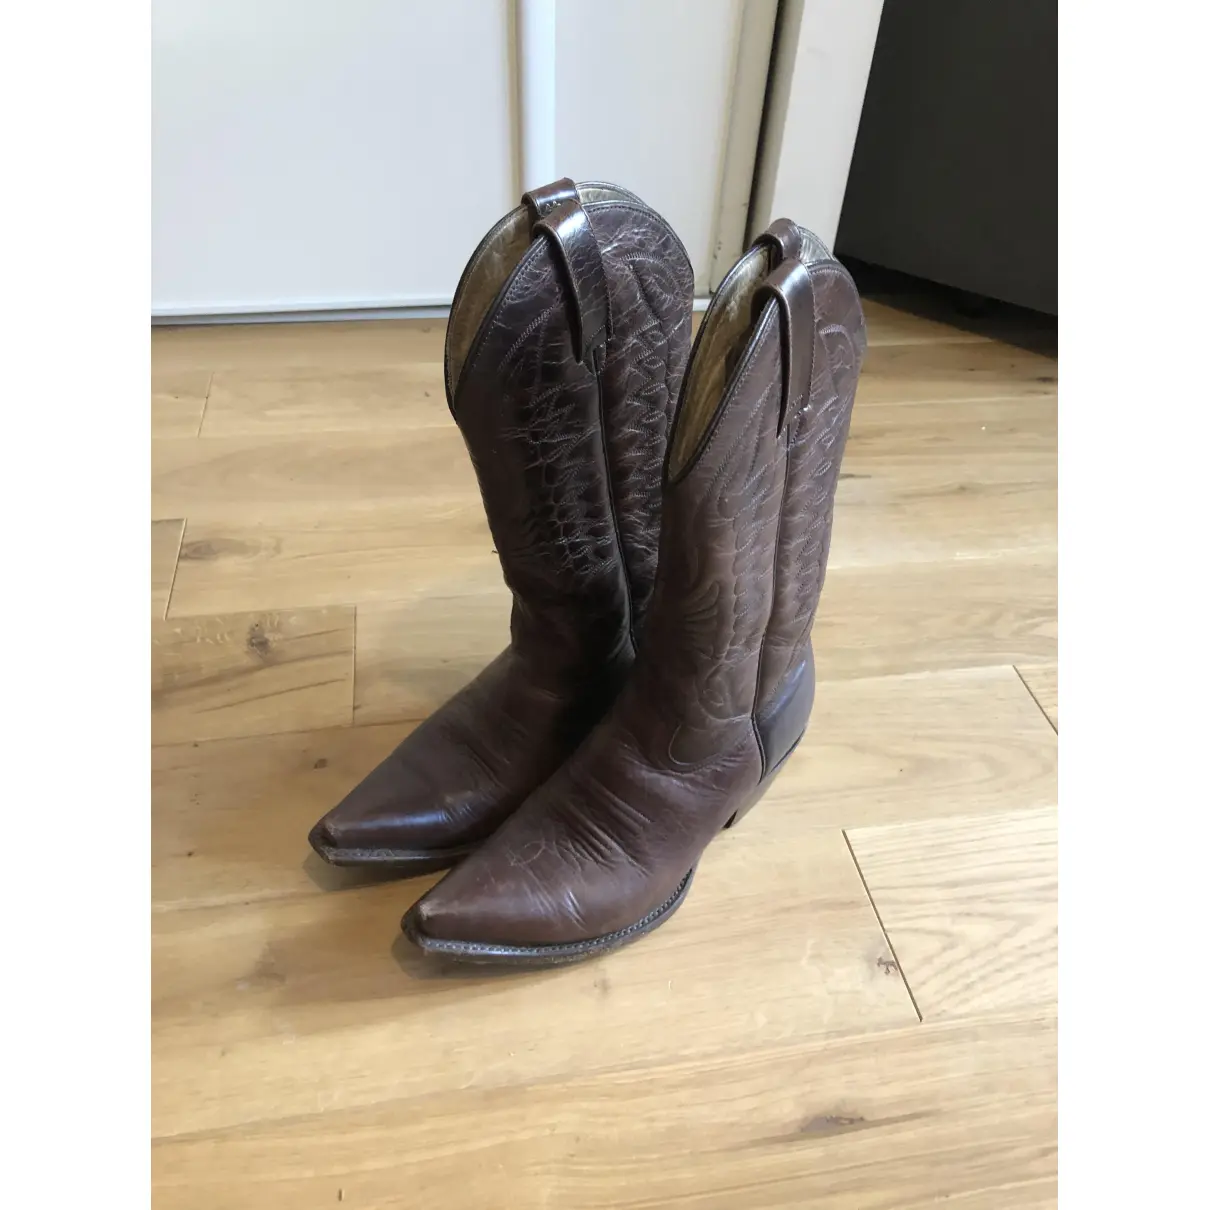 Buy Mexicana Leather cowboy boots online